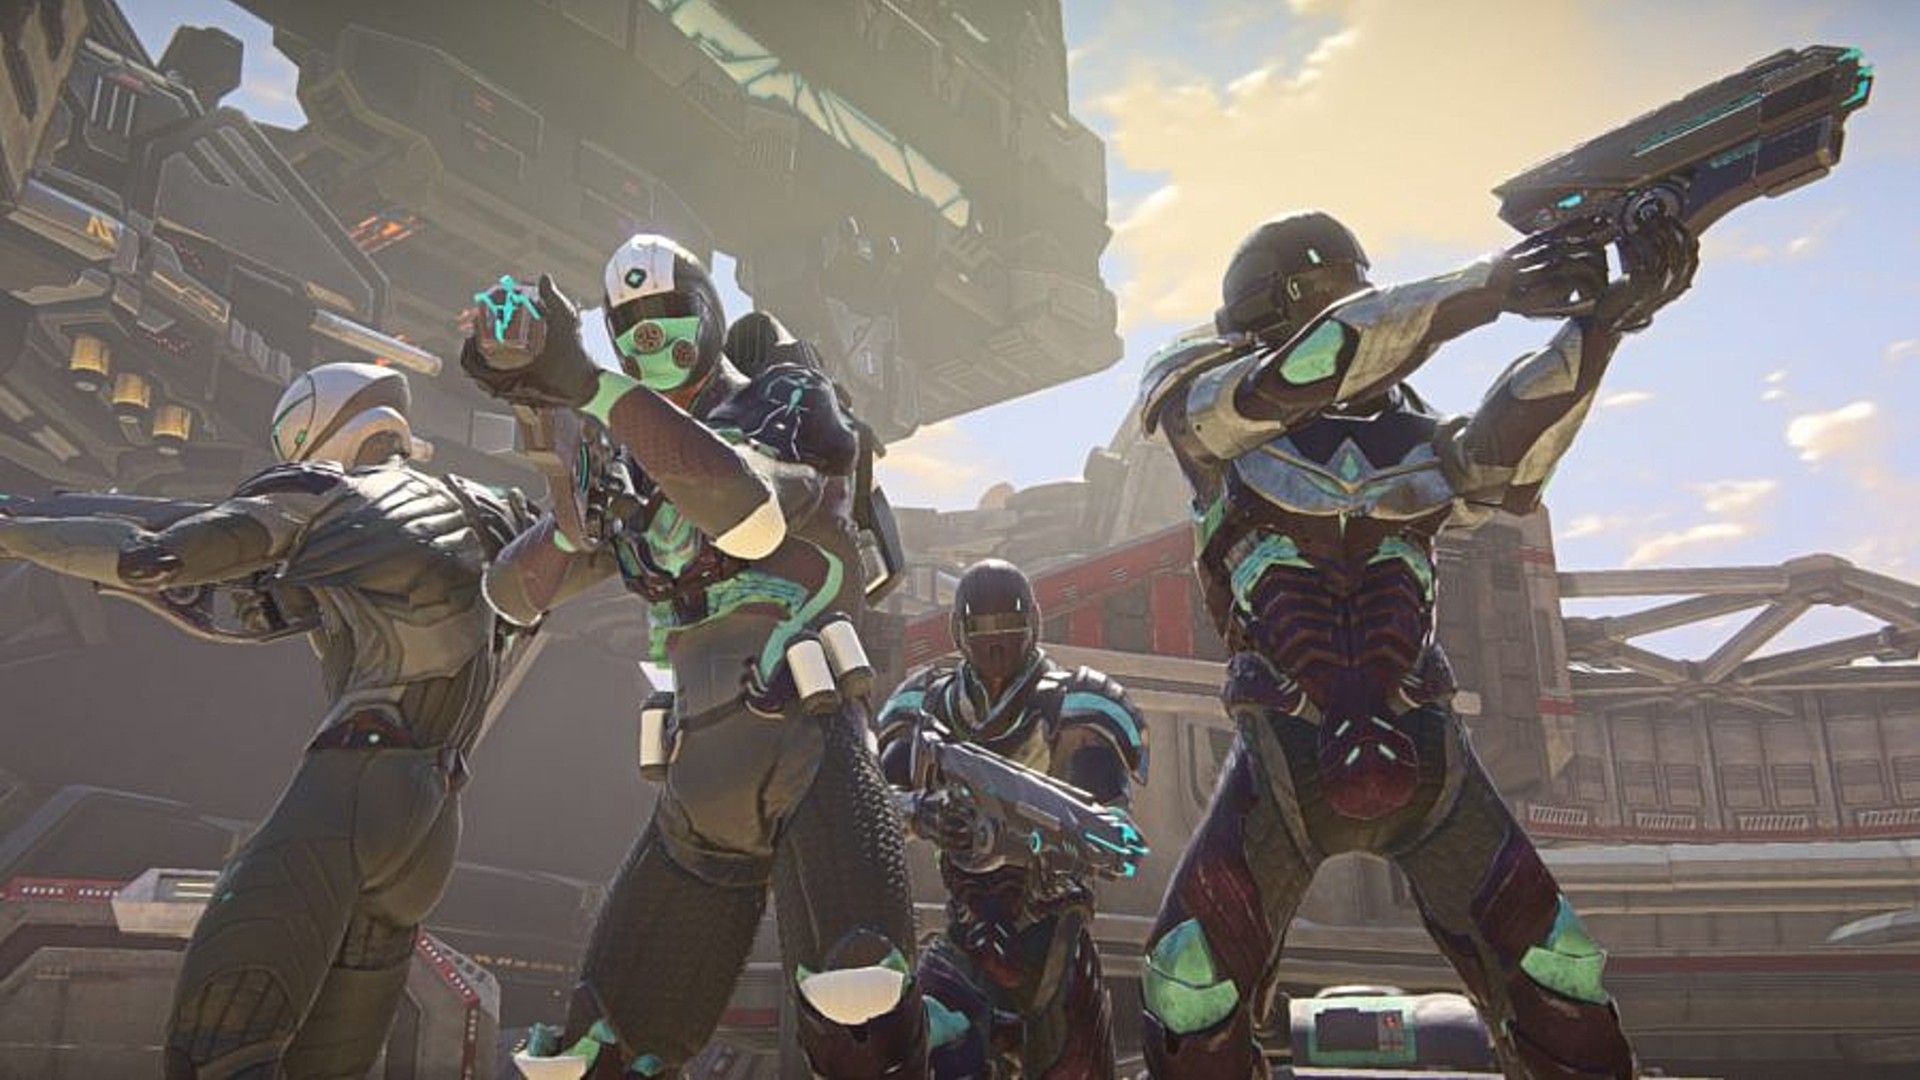 Best free PC games: Planetside 2. Image shows a group of four armed futuristic looking soldiers.